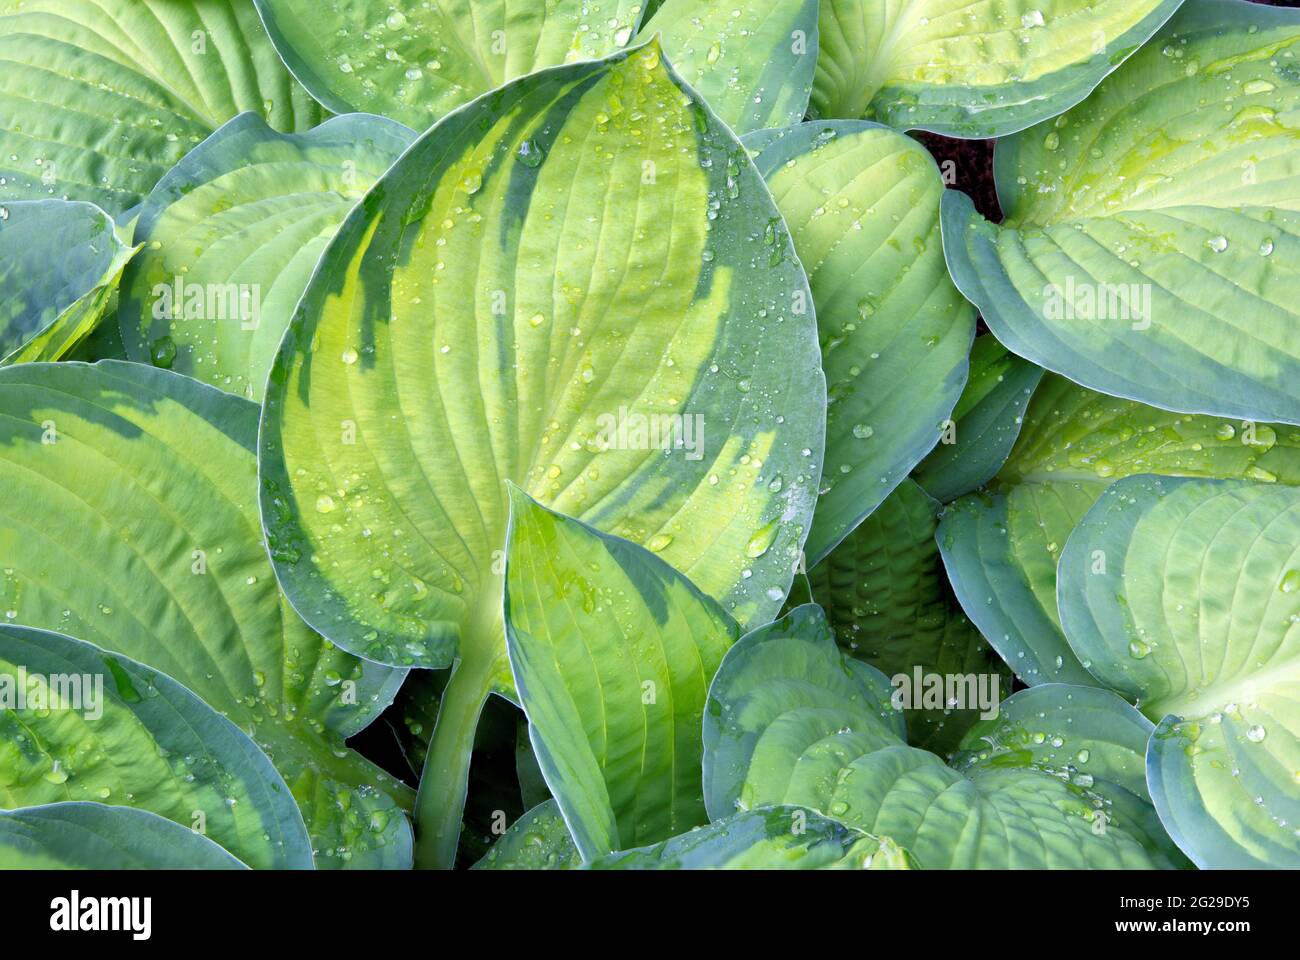 Beauty in nature. Raindrops scattered across textured surfaces of colorful variegated green and blue Hosta leaves (also known as plantain lily). Stock Photo